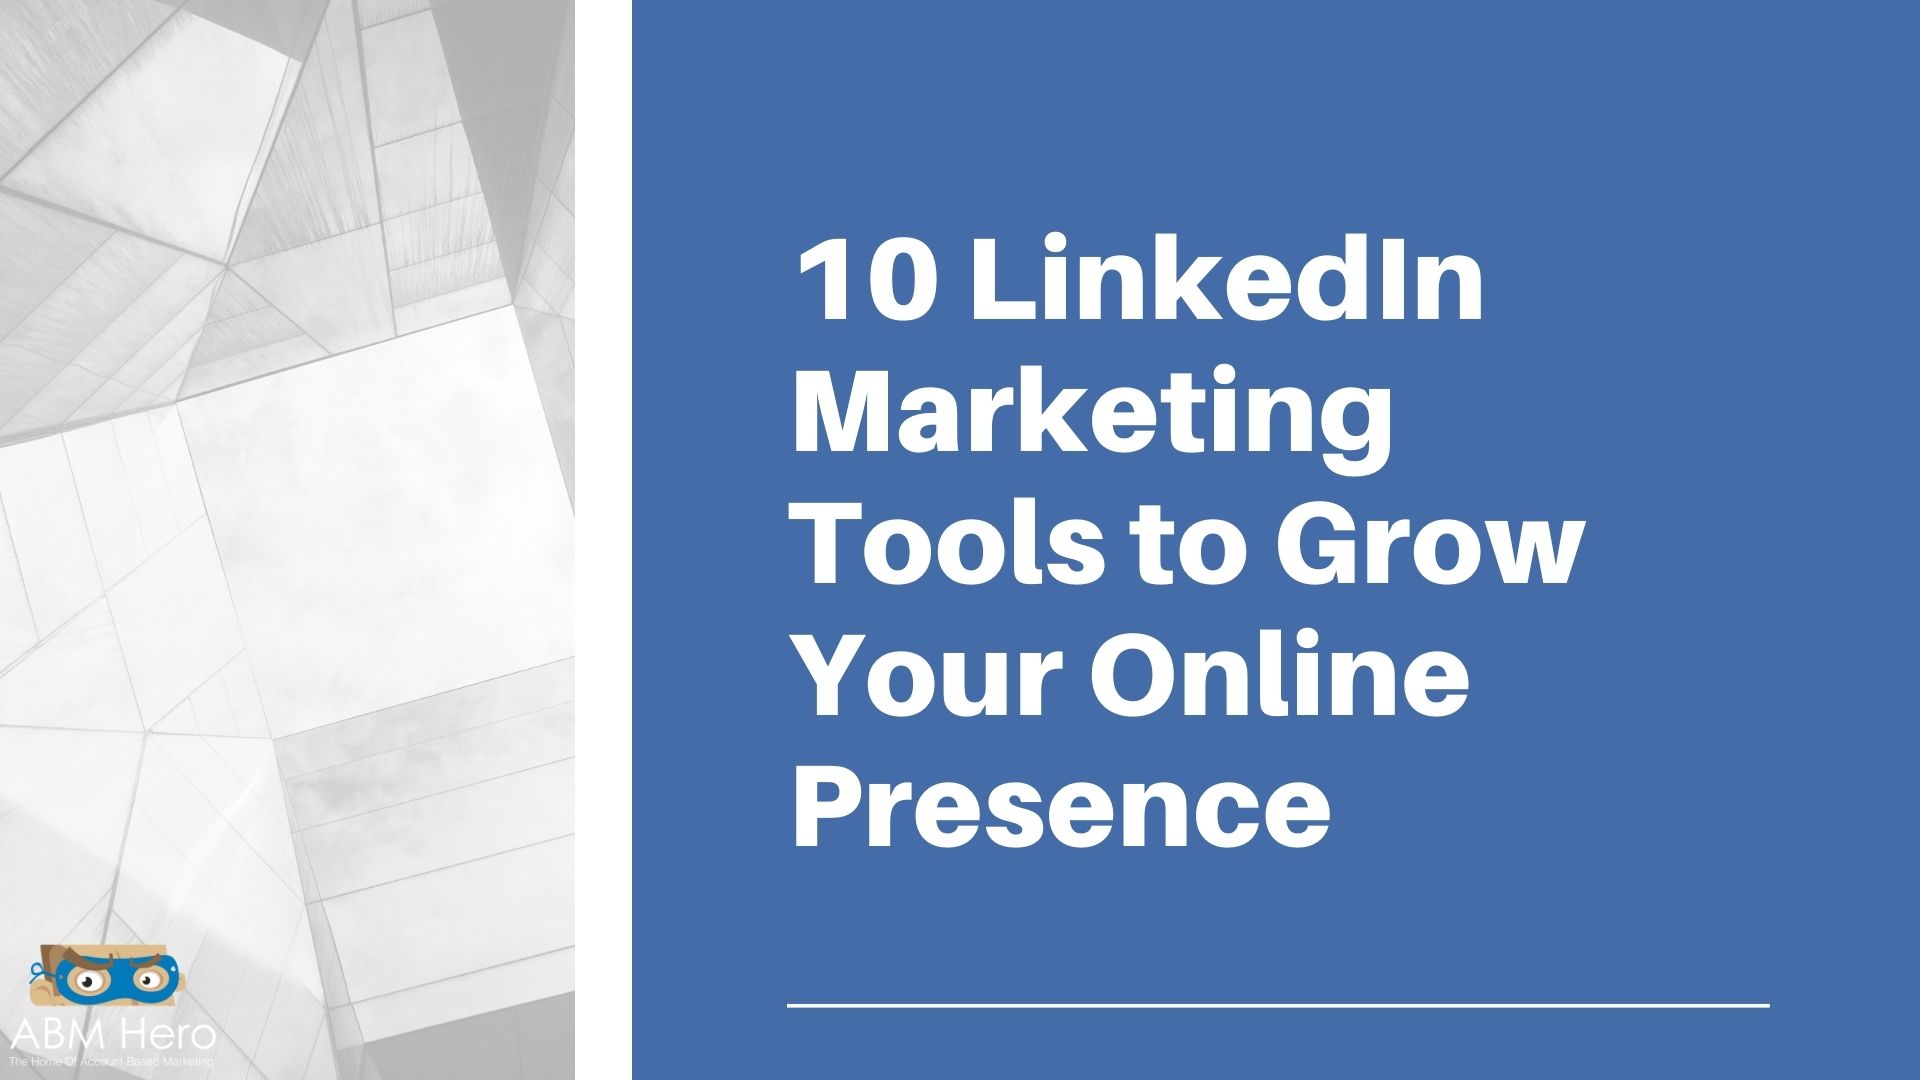 You are currently viewing 10 LinkedIn Marketing Tools to Grow Your Online Presence